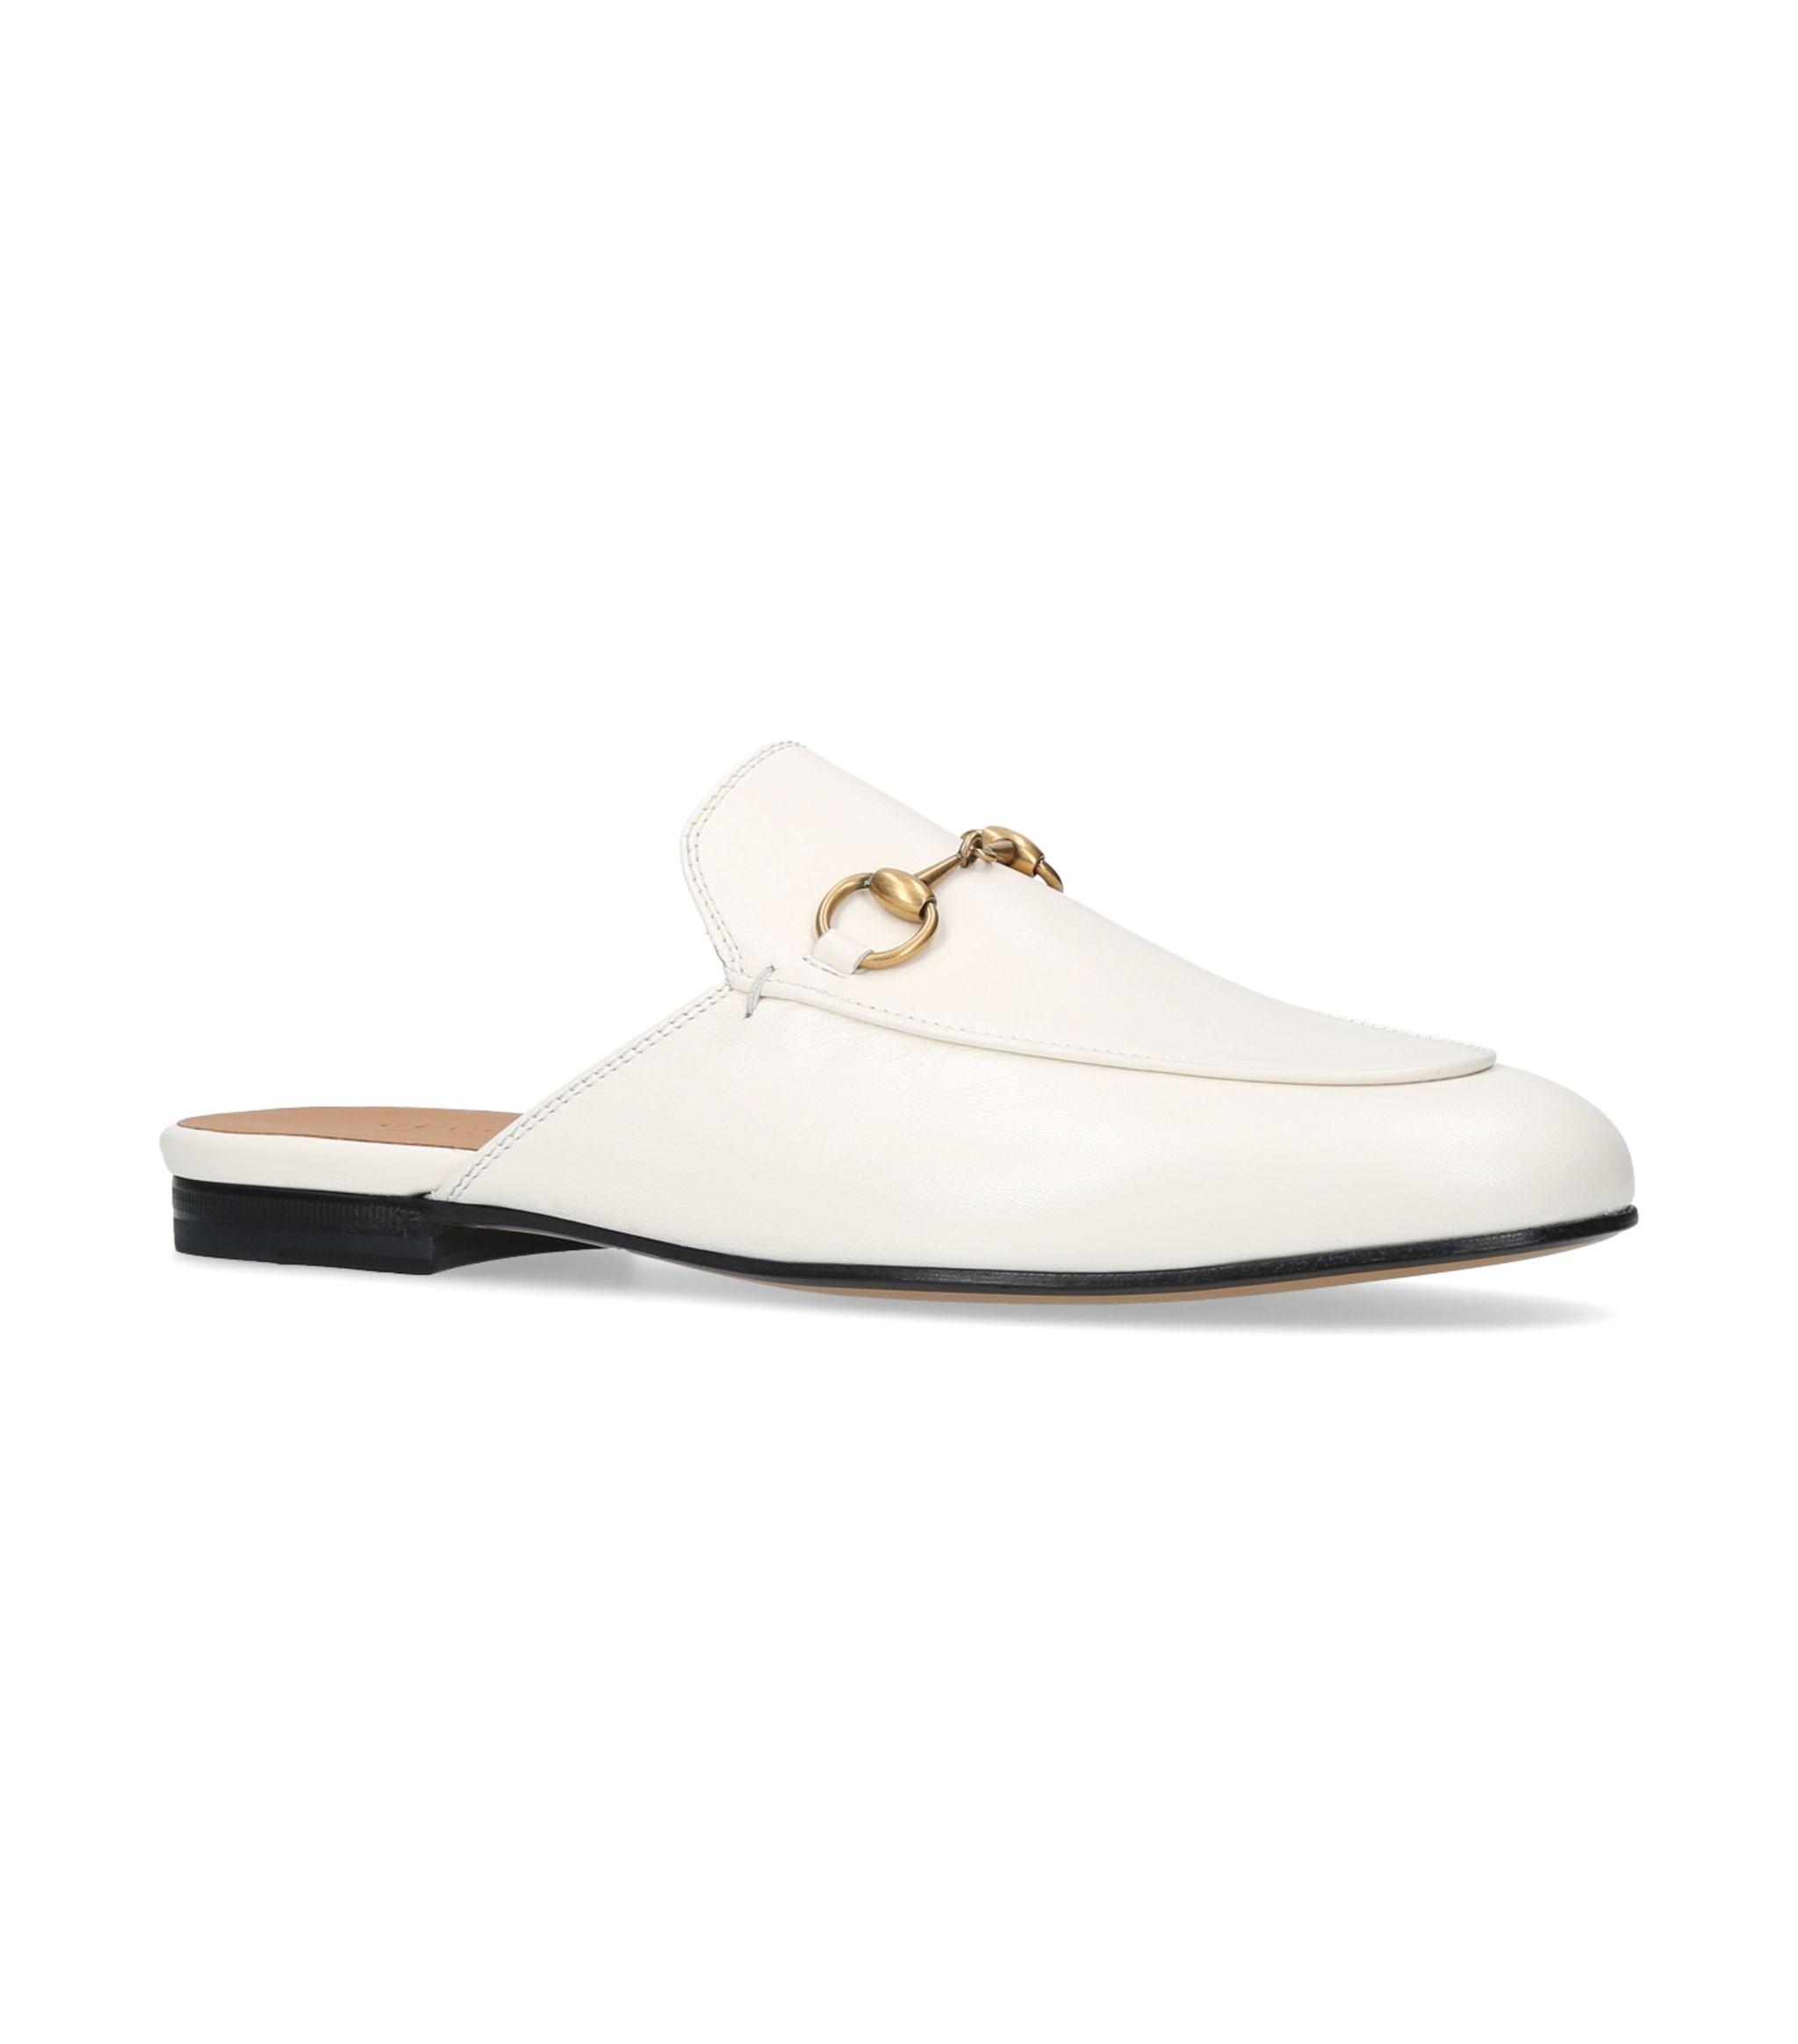 Gucci Leather Princetown Slippers in White - Lyst